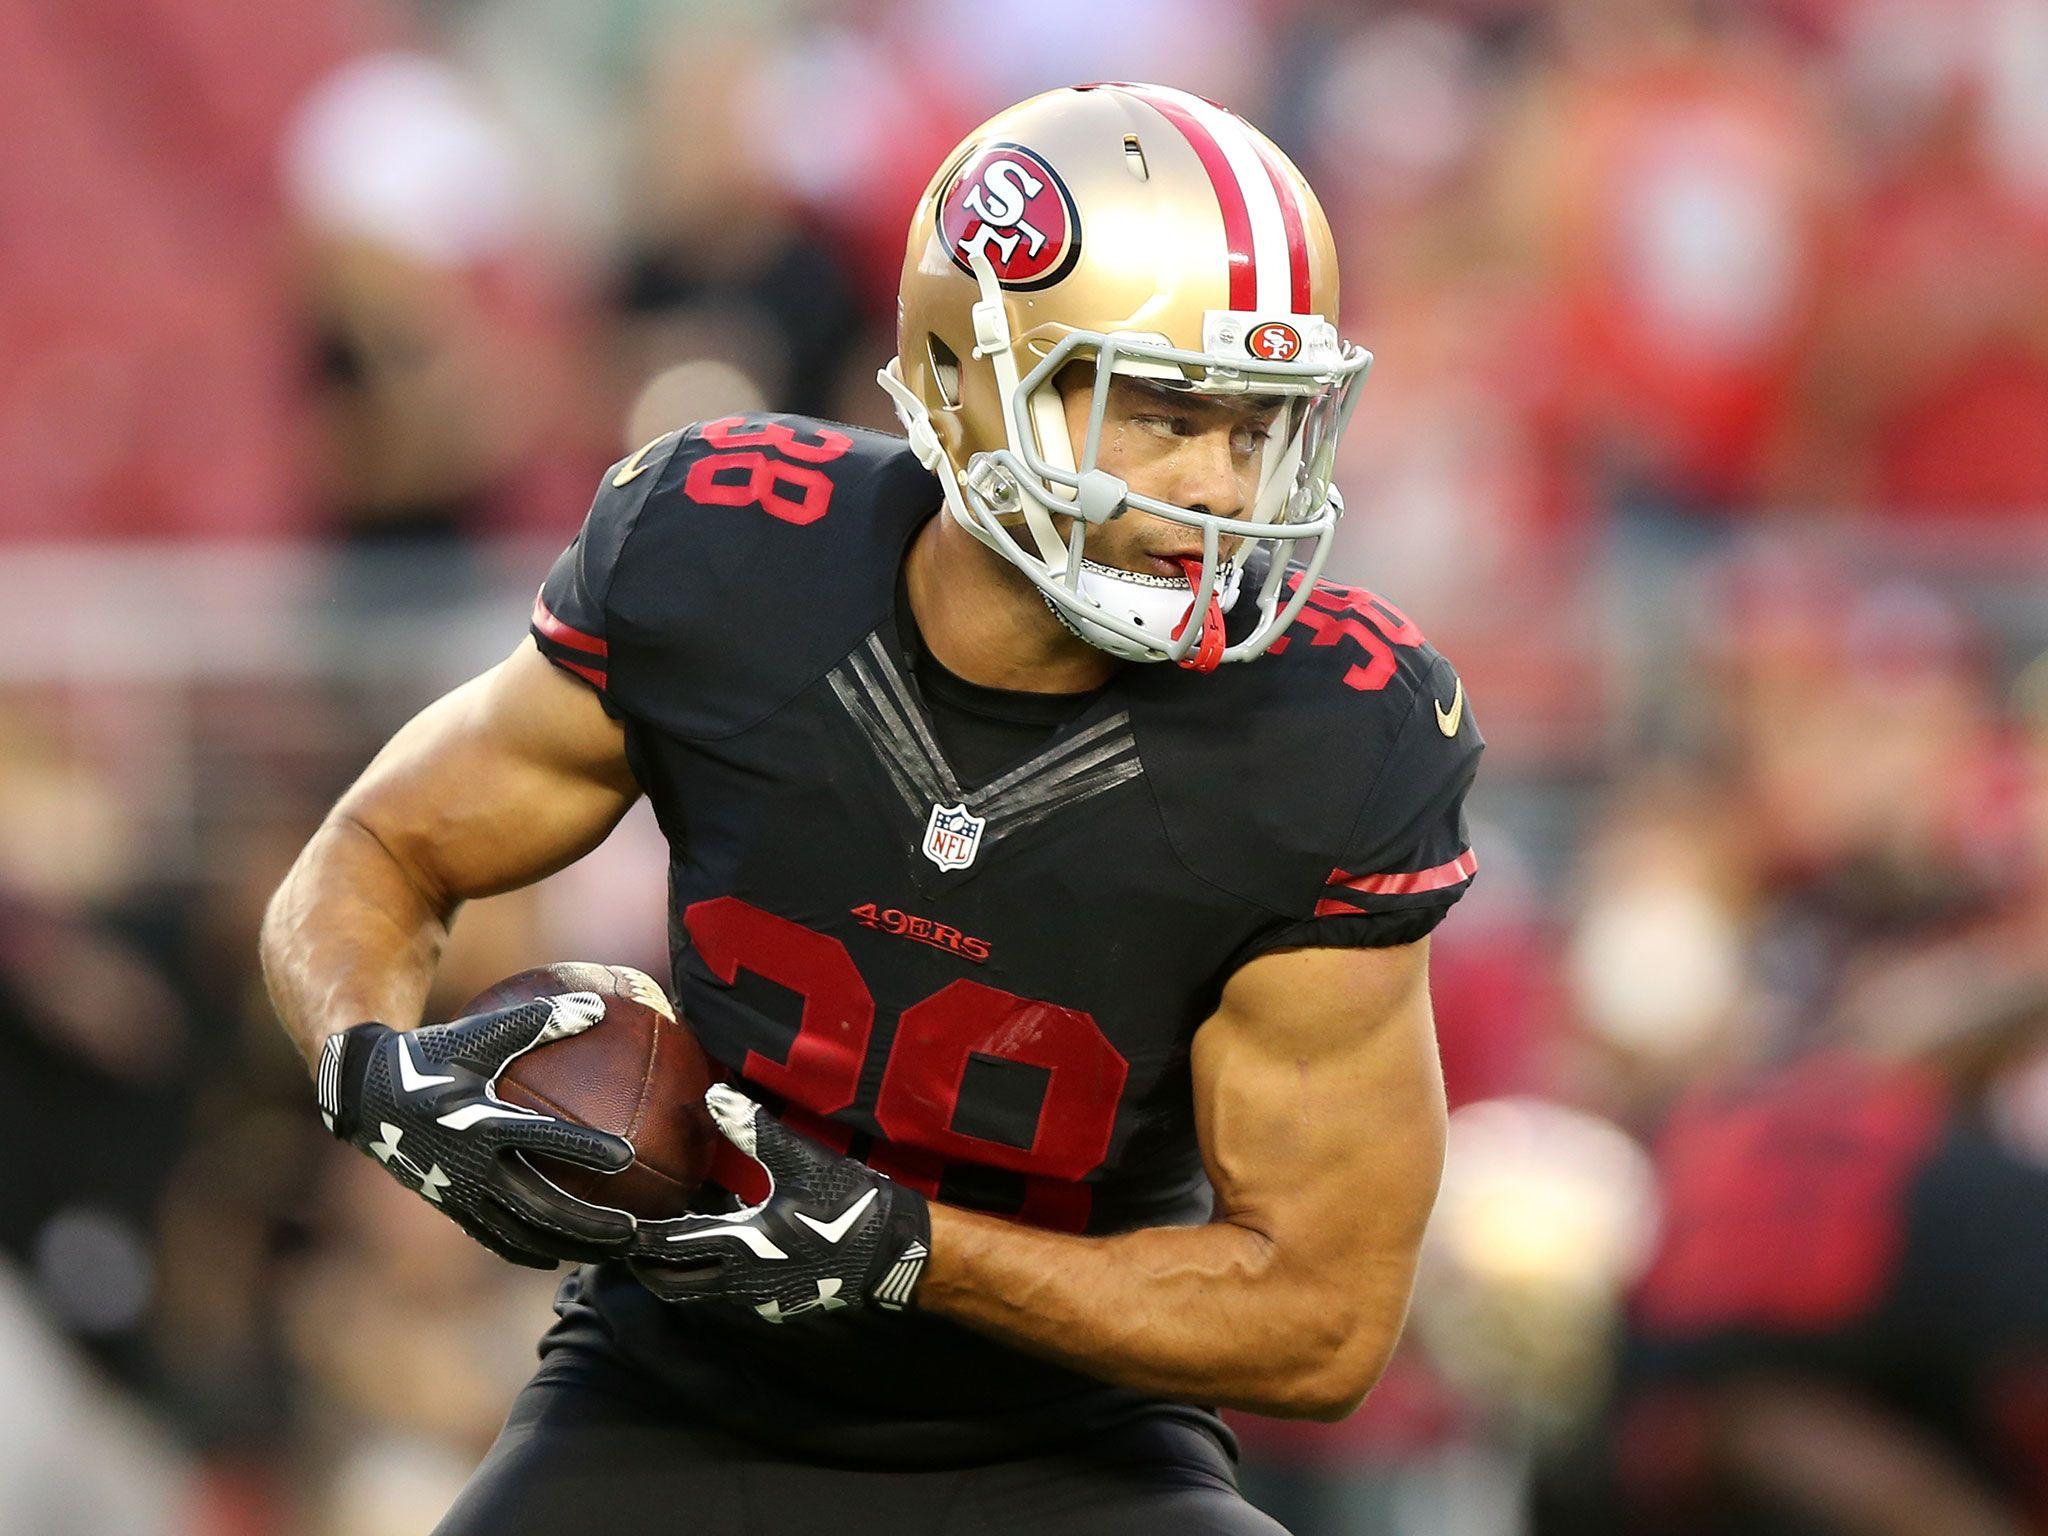 Jarryd Hayne drops his first touch in NFL and Adrian Peterson